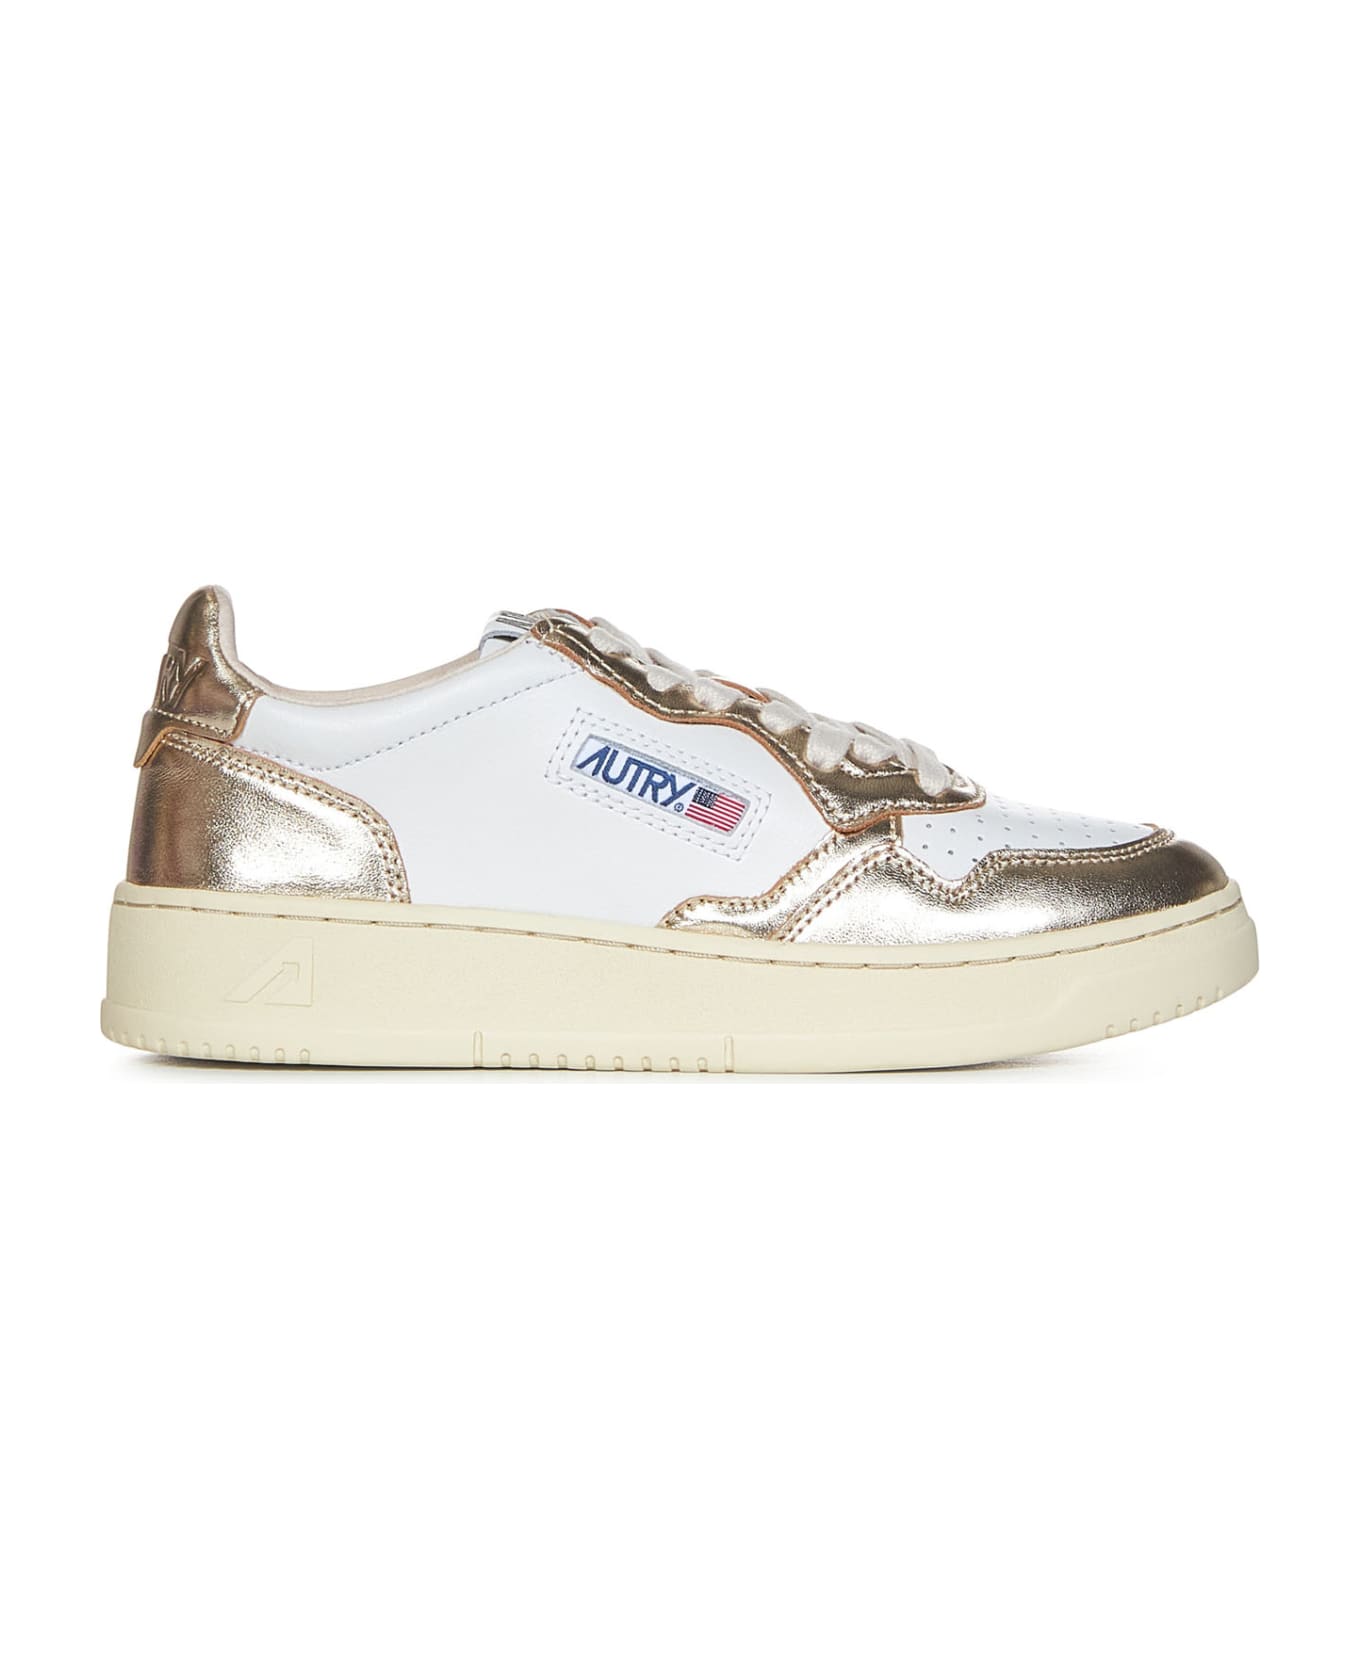 Autry Medalist Low Sneakers - Oro